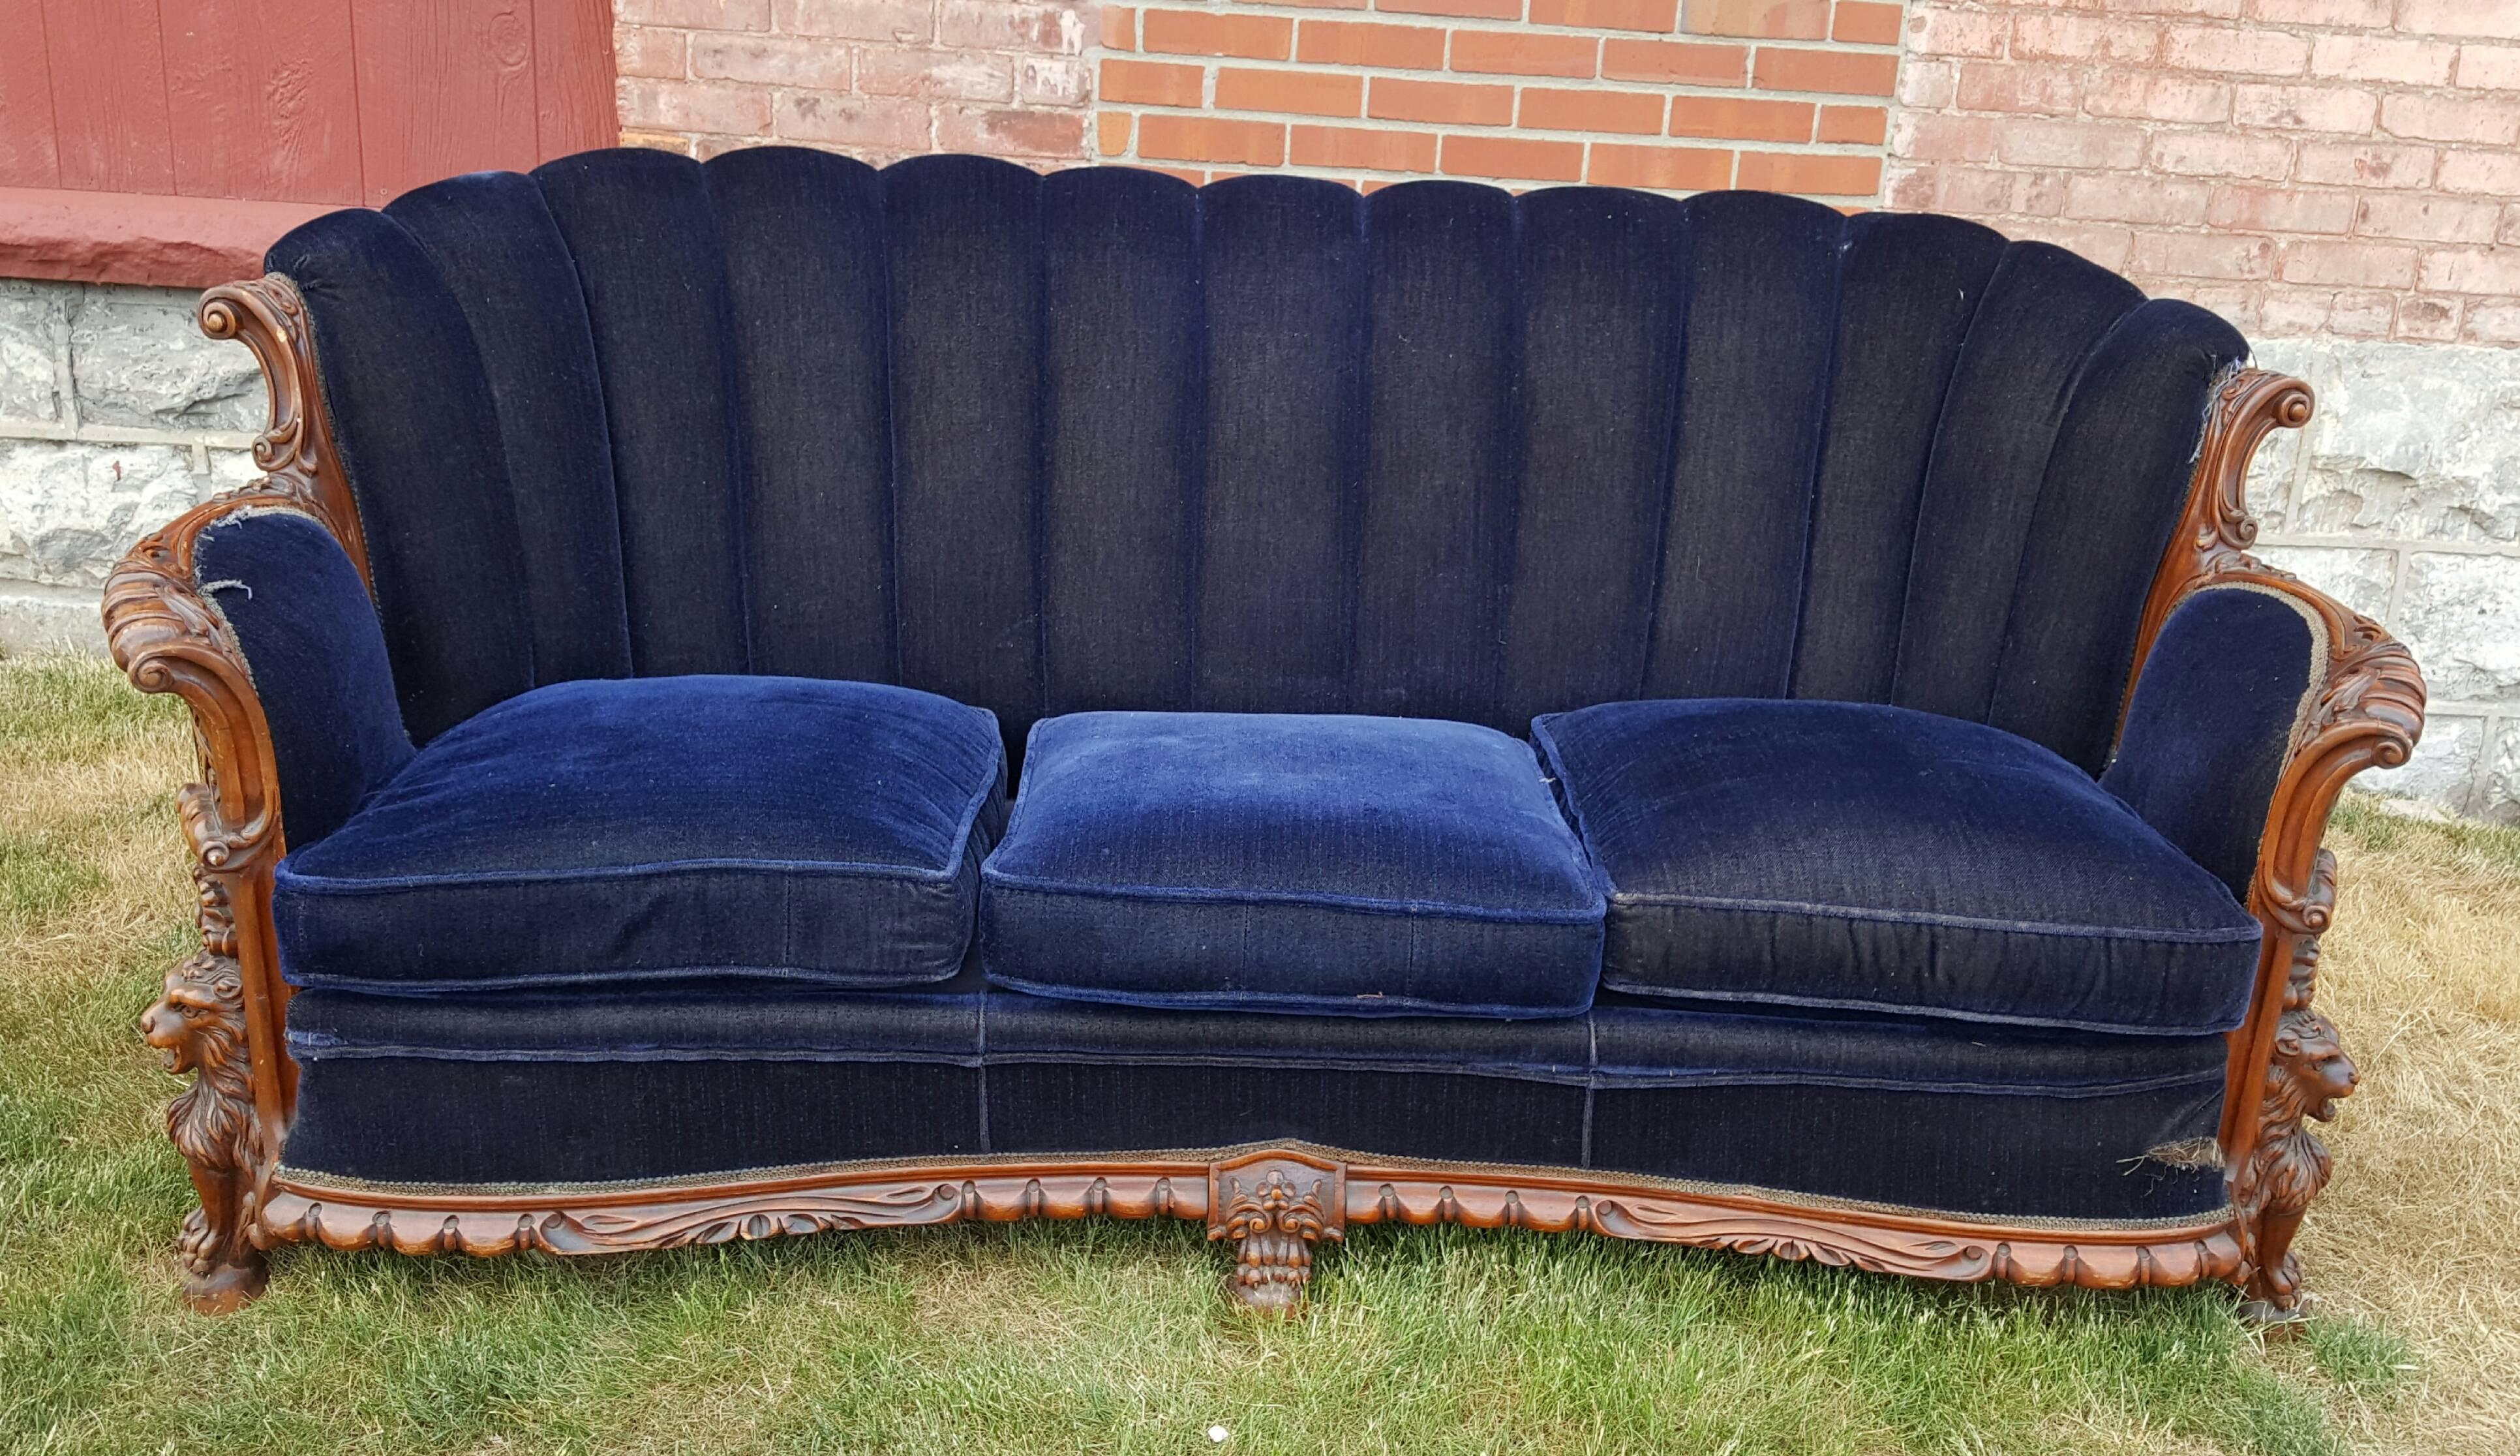 Wonderful high style Art Deco sofa, made in in 1930s, retain original blue and mohair fabric upholstery, in need of repair, heavily carved mahogany wood frames, amazing carved lions motif along with gorgeous carved wood details, superior quality and